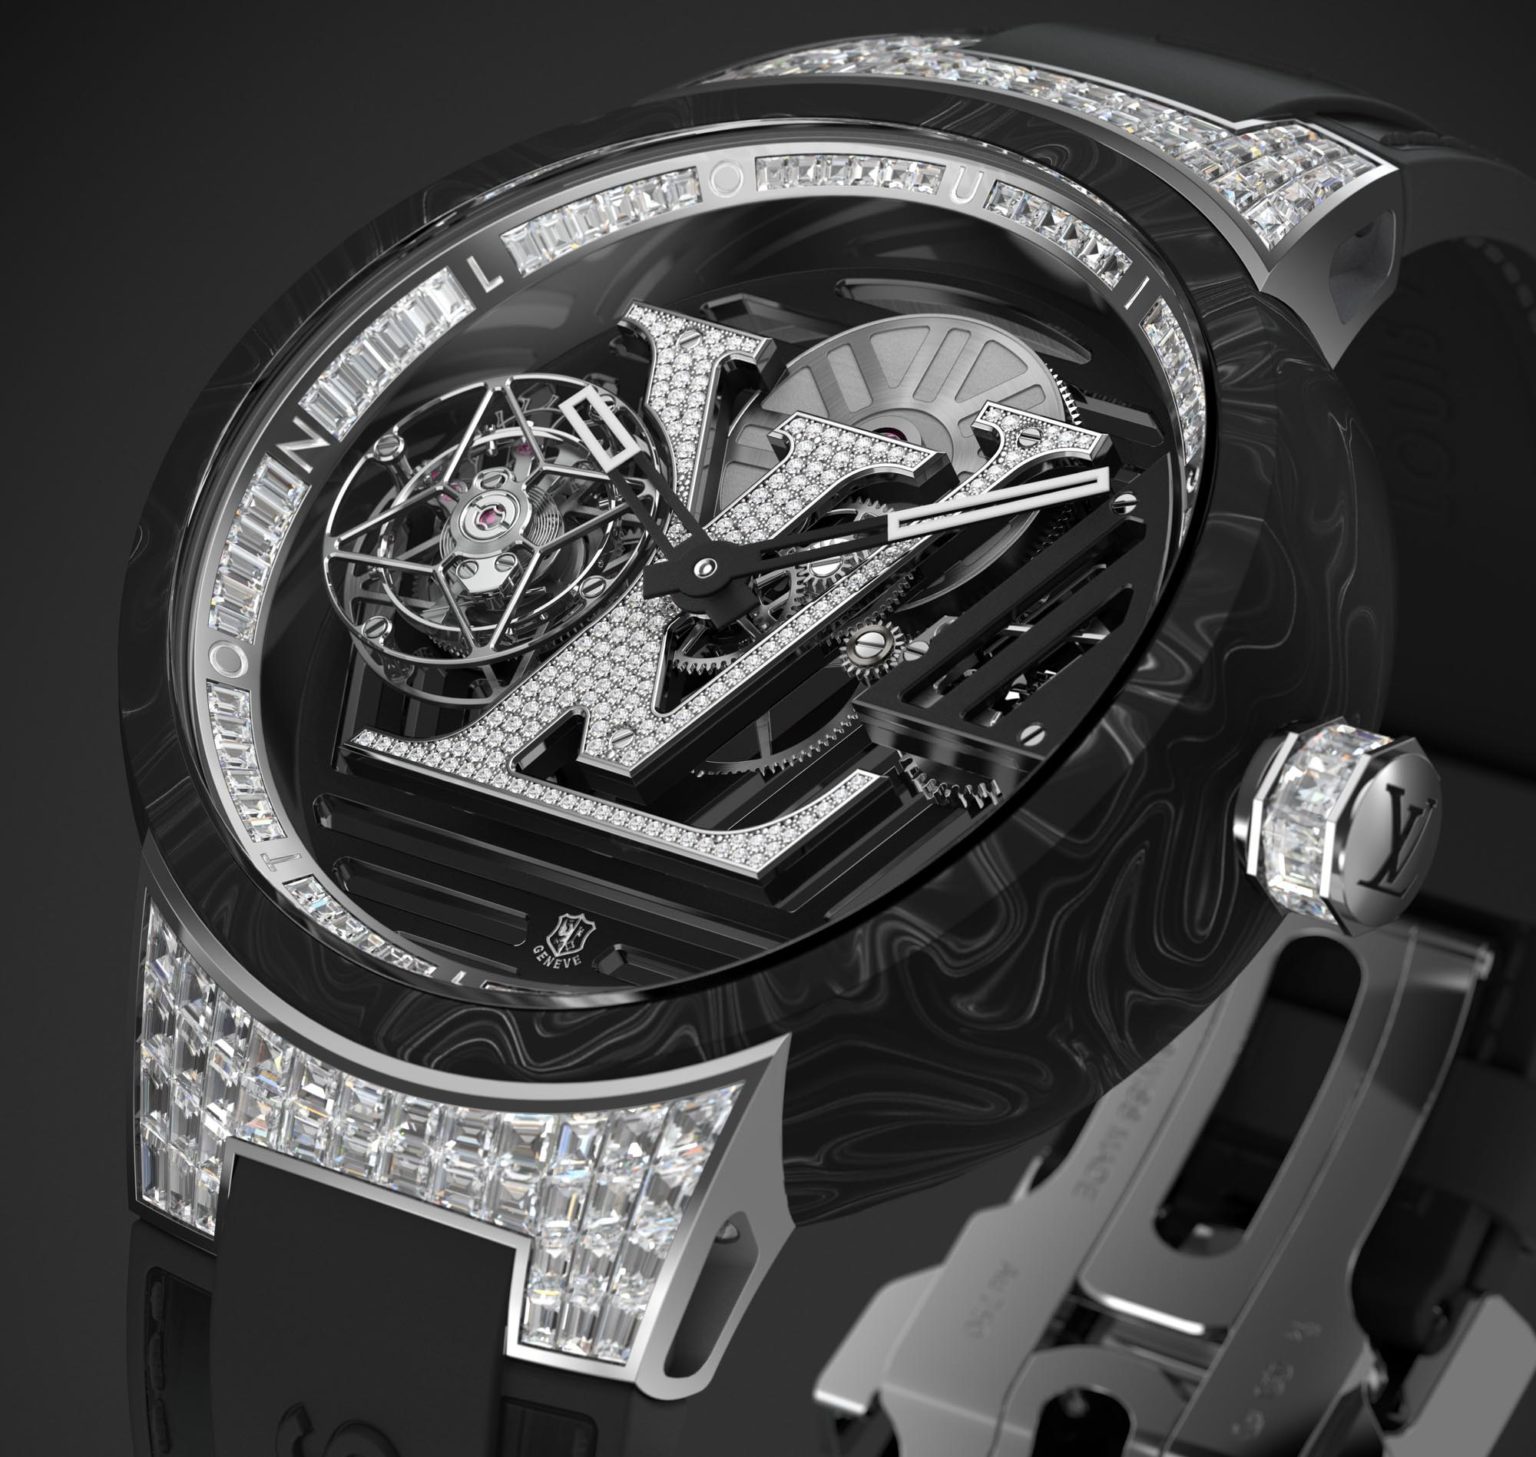 The Louis Vuitton Tambour Curve Flying Tourbillon Is A €280,000 Watch ...